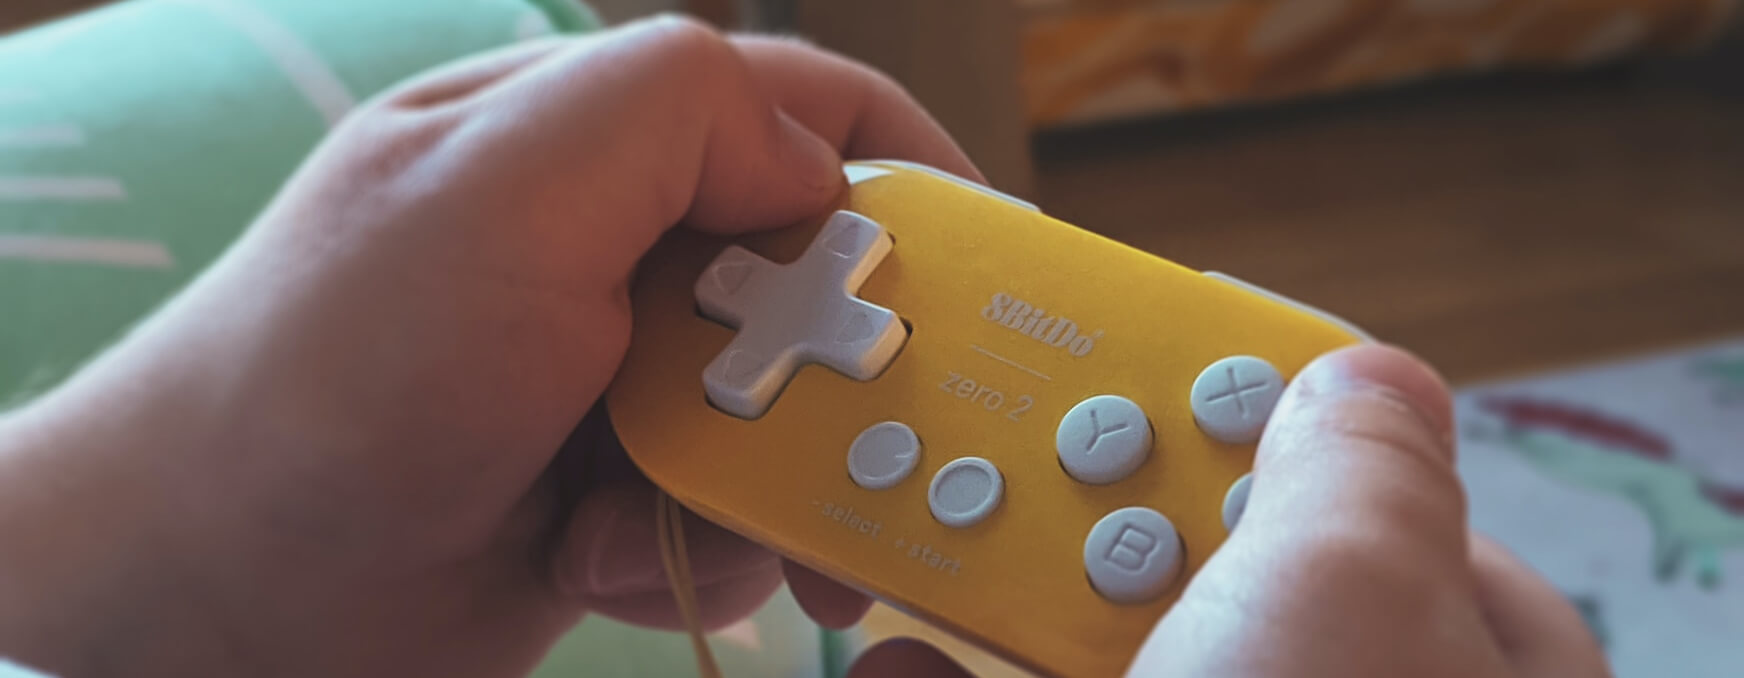 the image shows a child's hands playing on a Nintendo device to reflect our free gaming support group for children impacted by mental health needs.